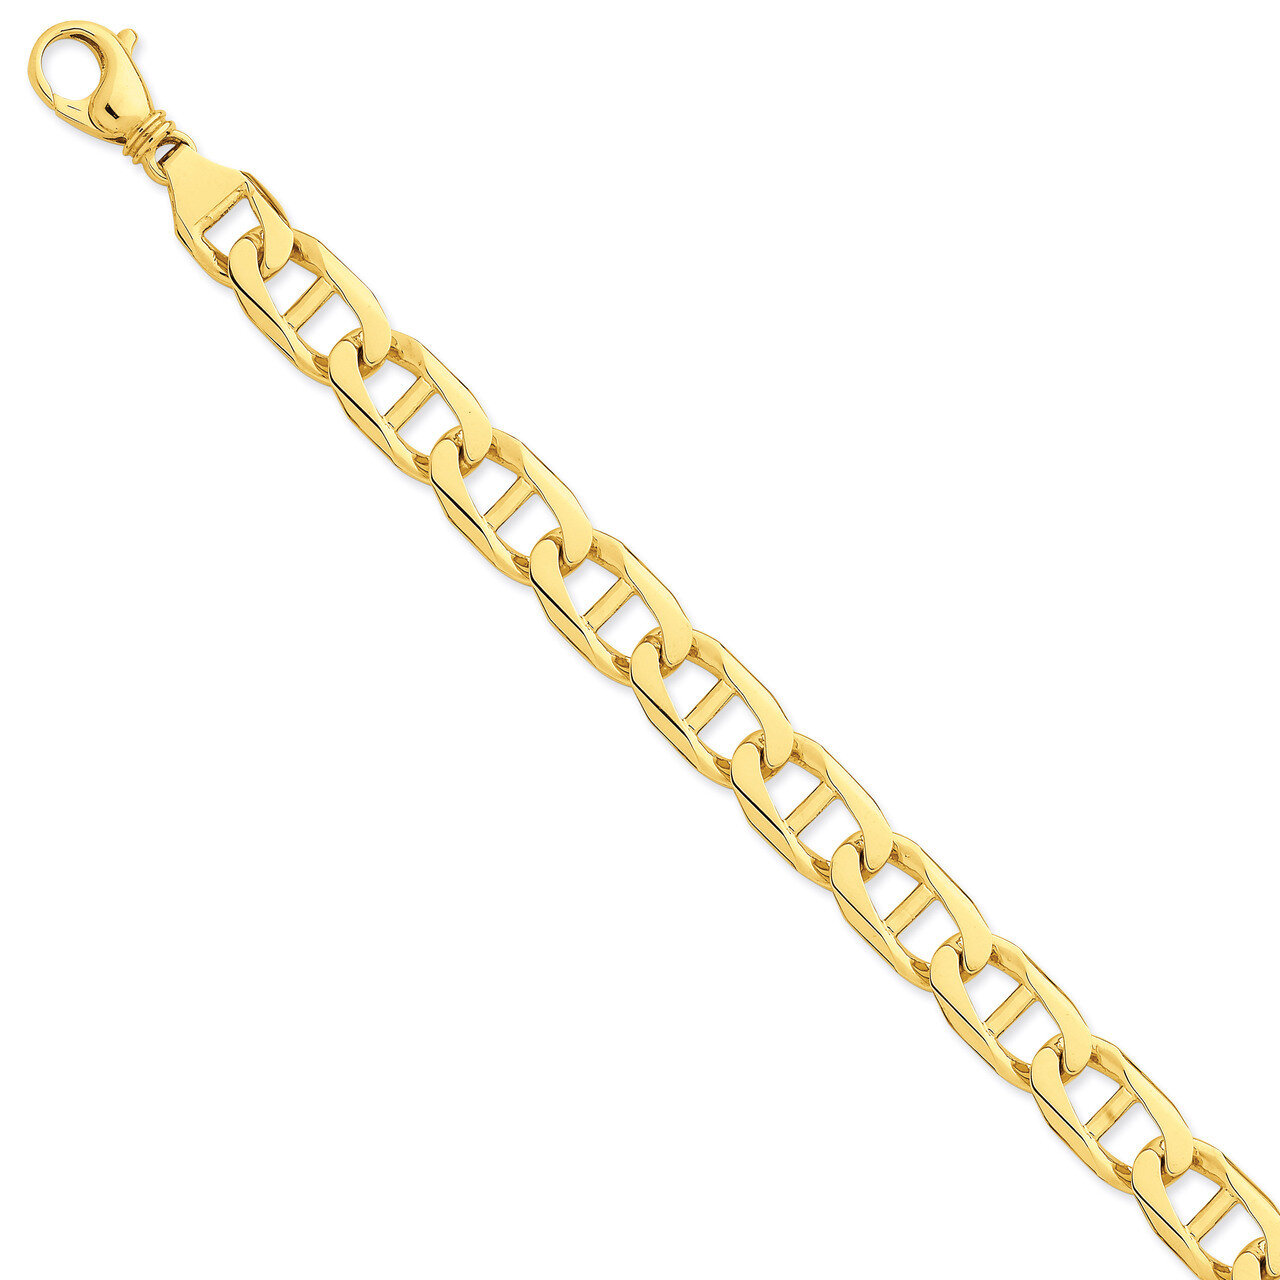 11mm Hand-polished Anchor Link Chain 20 Inch 14k Gold LK102-20